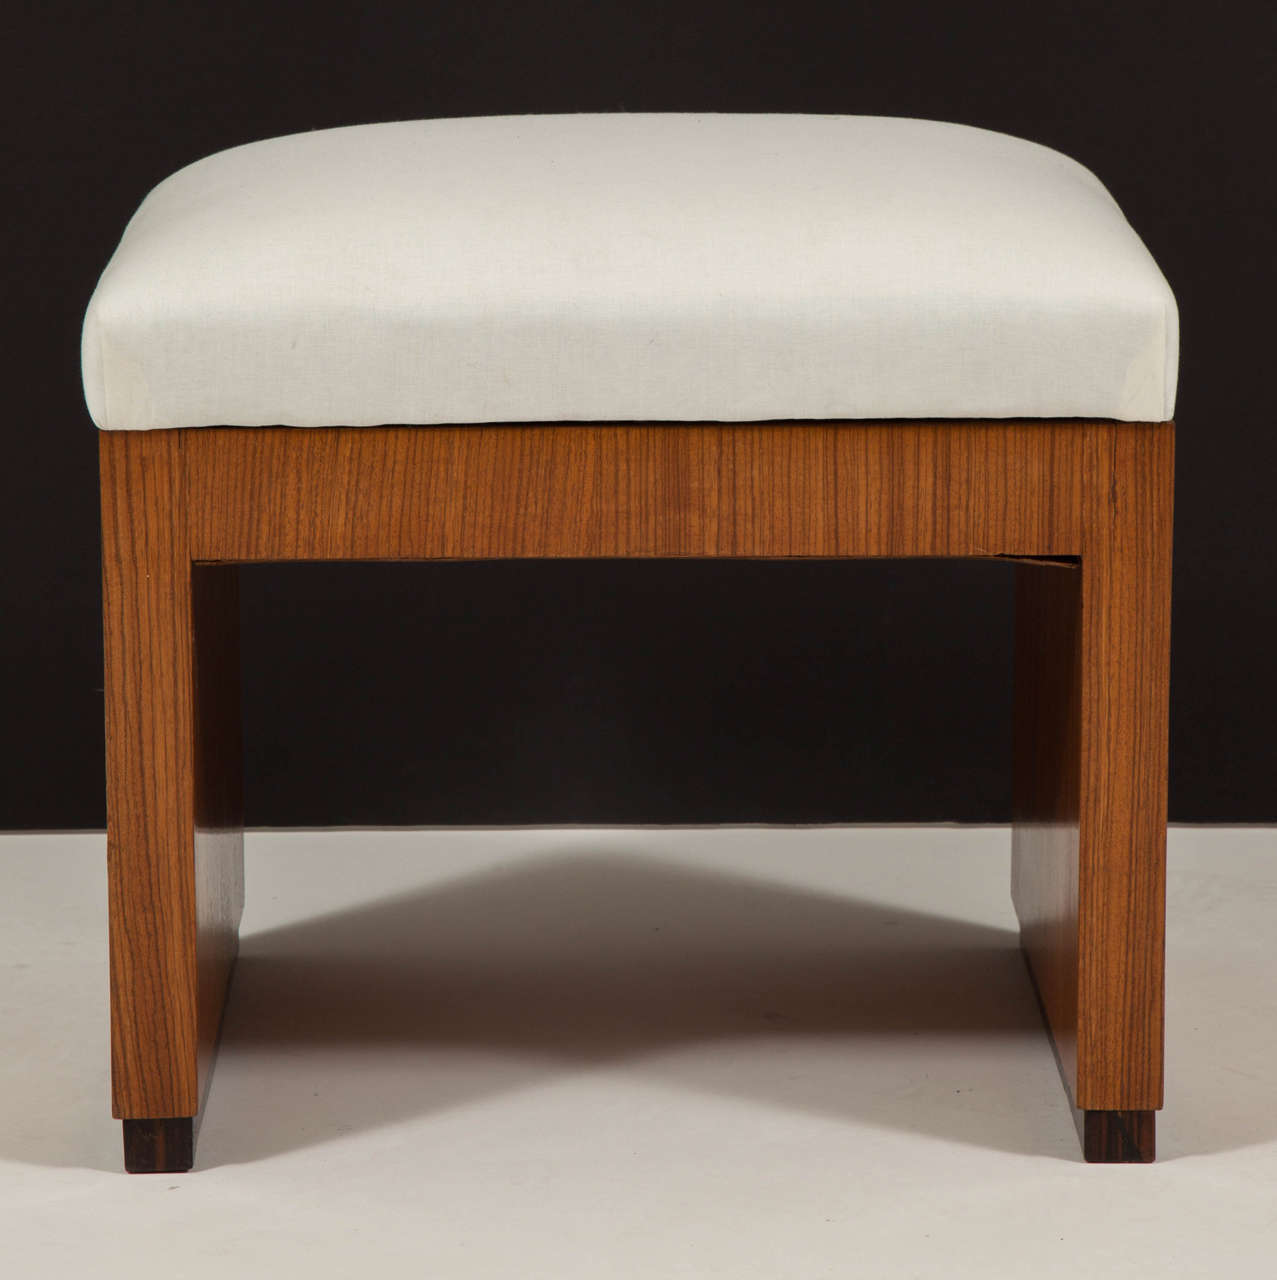 Early 20th century Art Deco style palisander bench, upholstered seat on rectangular base.